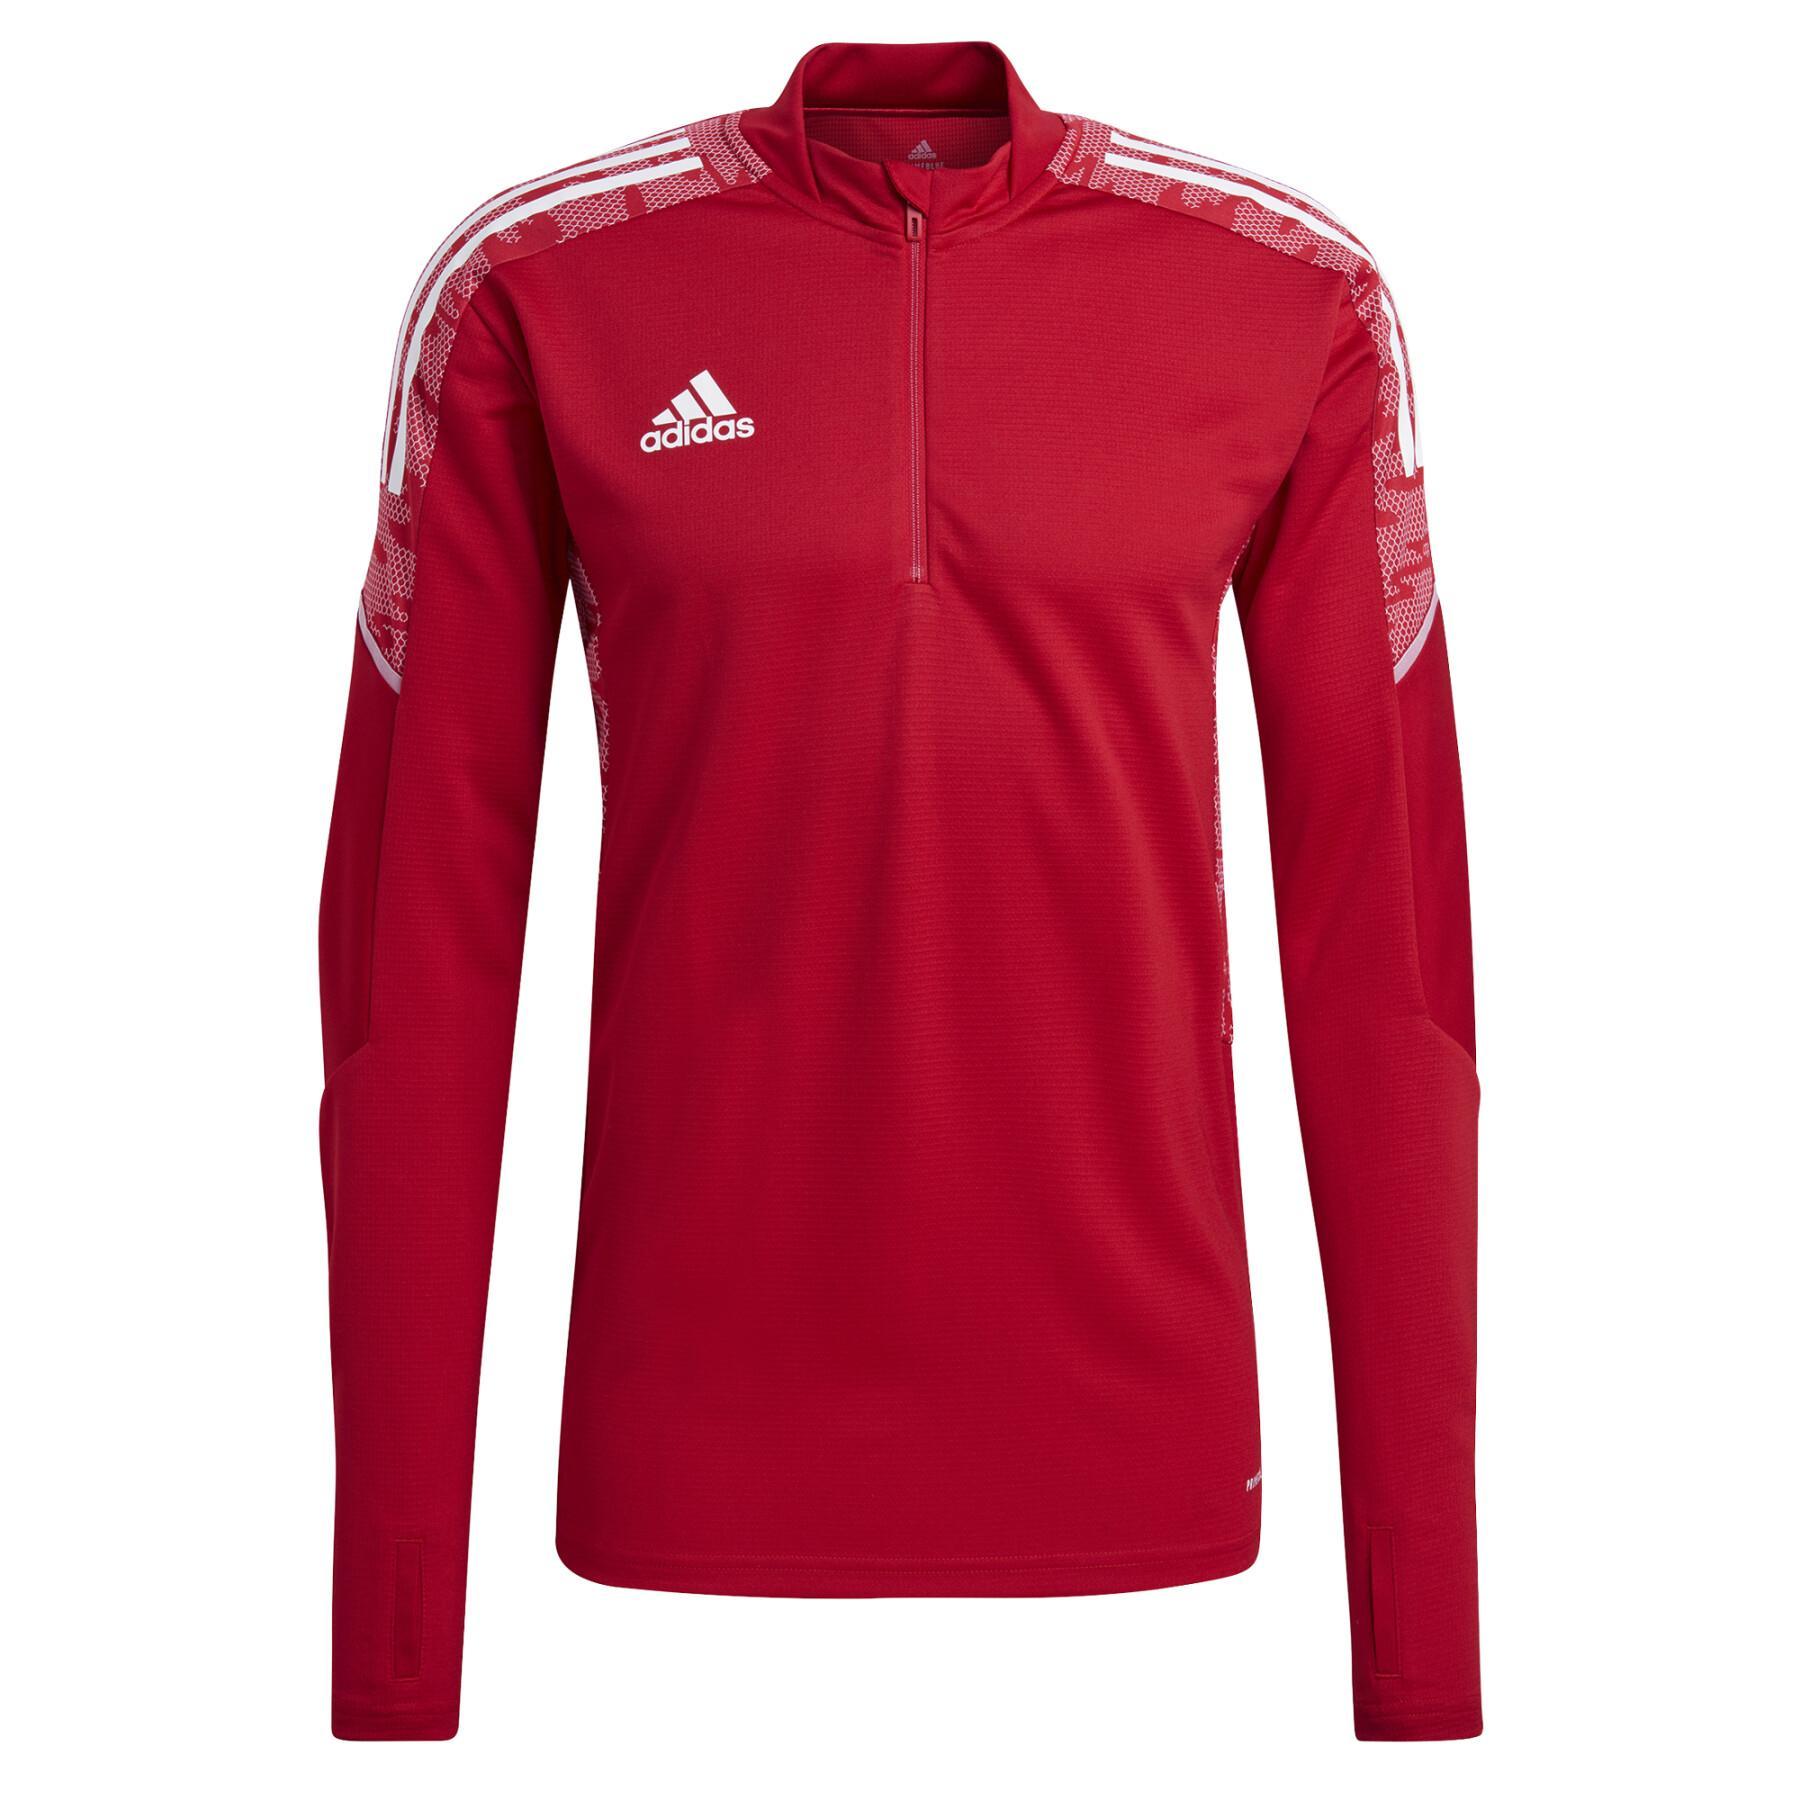 adidas Condivo 21 1/4 Training Top - Adult - Red